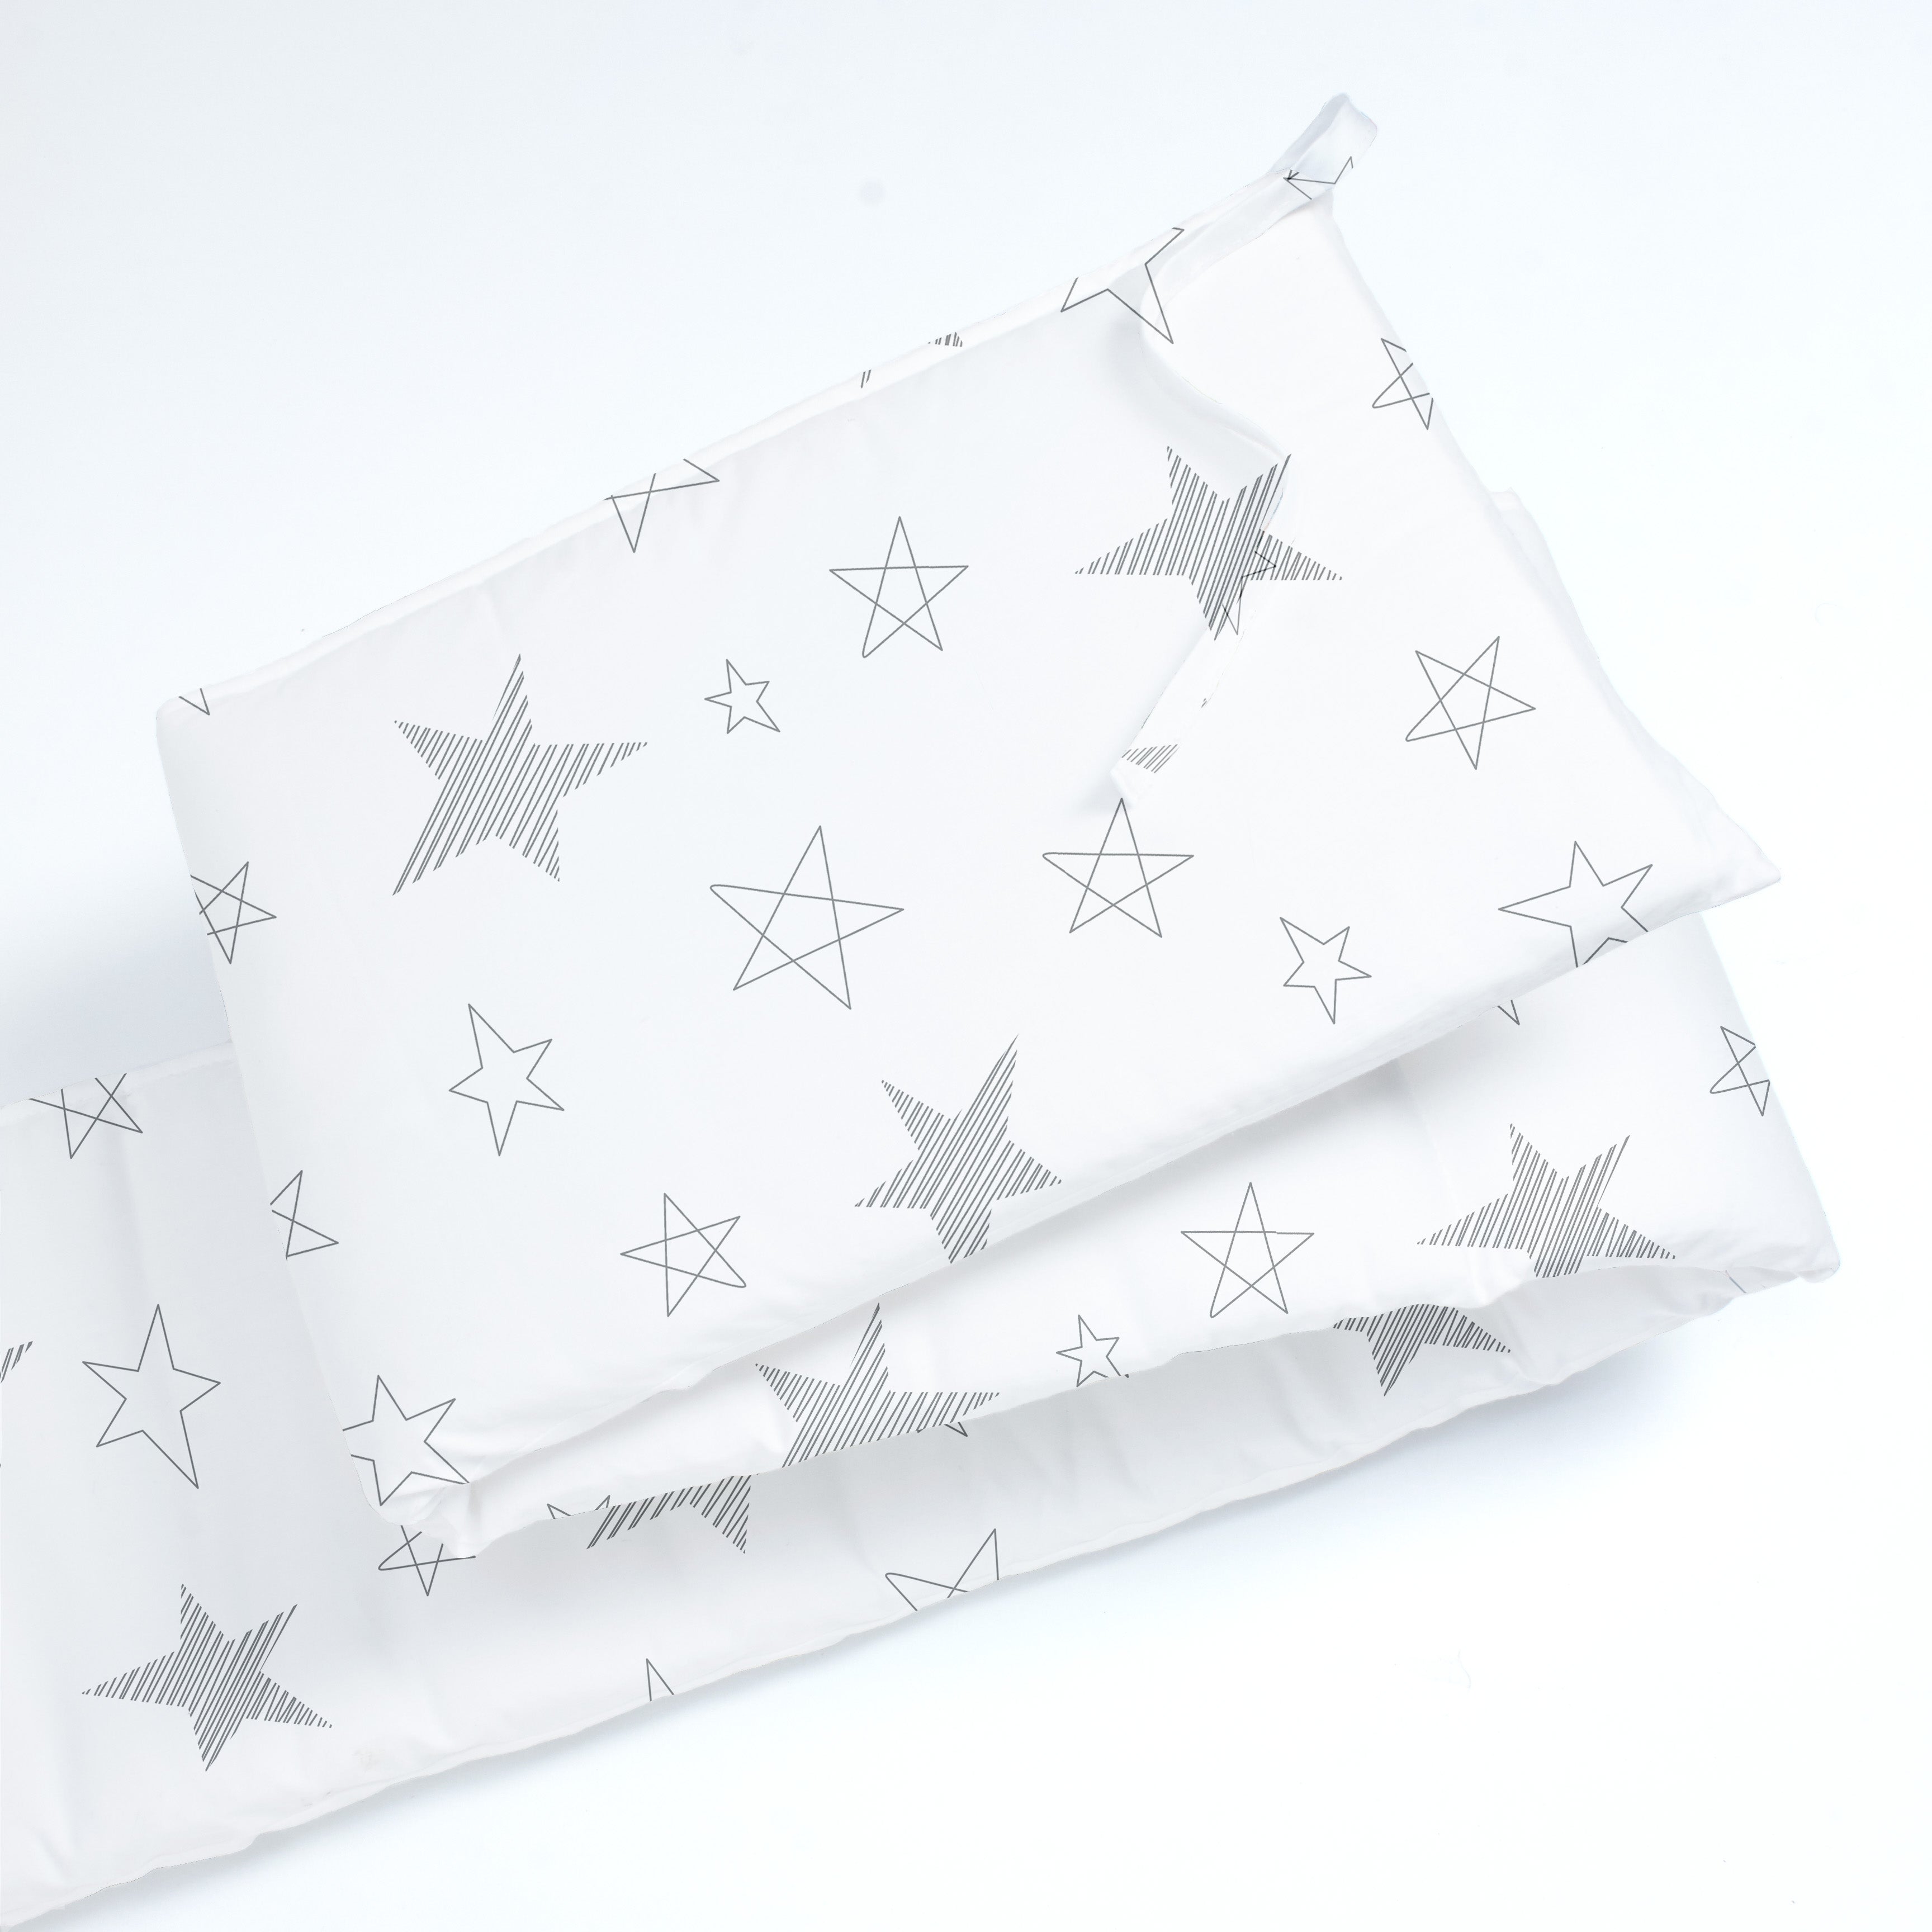 The White Cradle Baby Safe Cot Bumper Pad, Fits all Standard Cribs, Thick Padded Protective Liner for Child Nursery Bed, Soft Organic Cotton Fabric, Breathable, Non-Allergenic - Big Stars